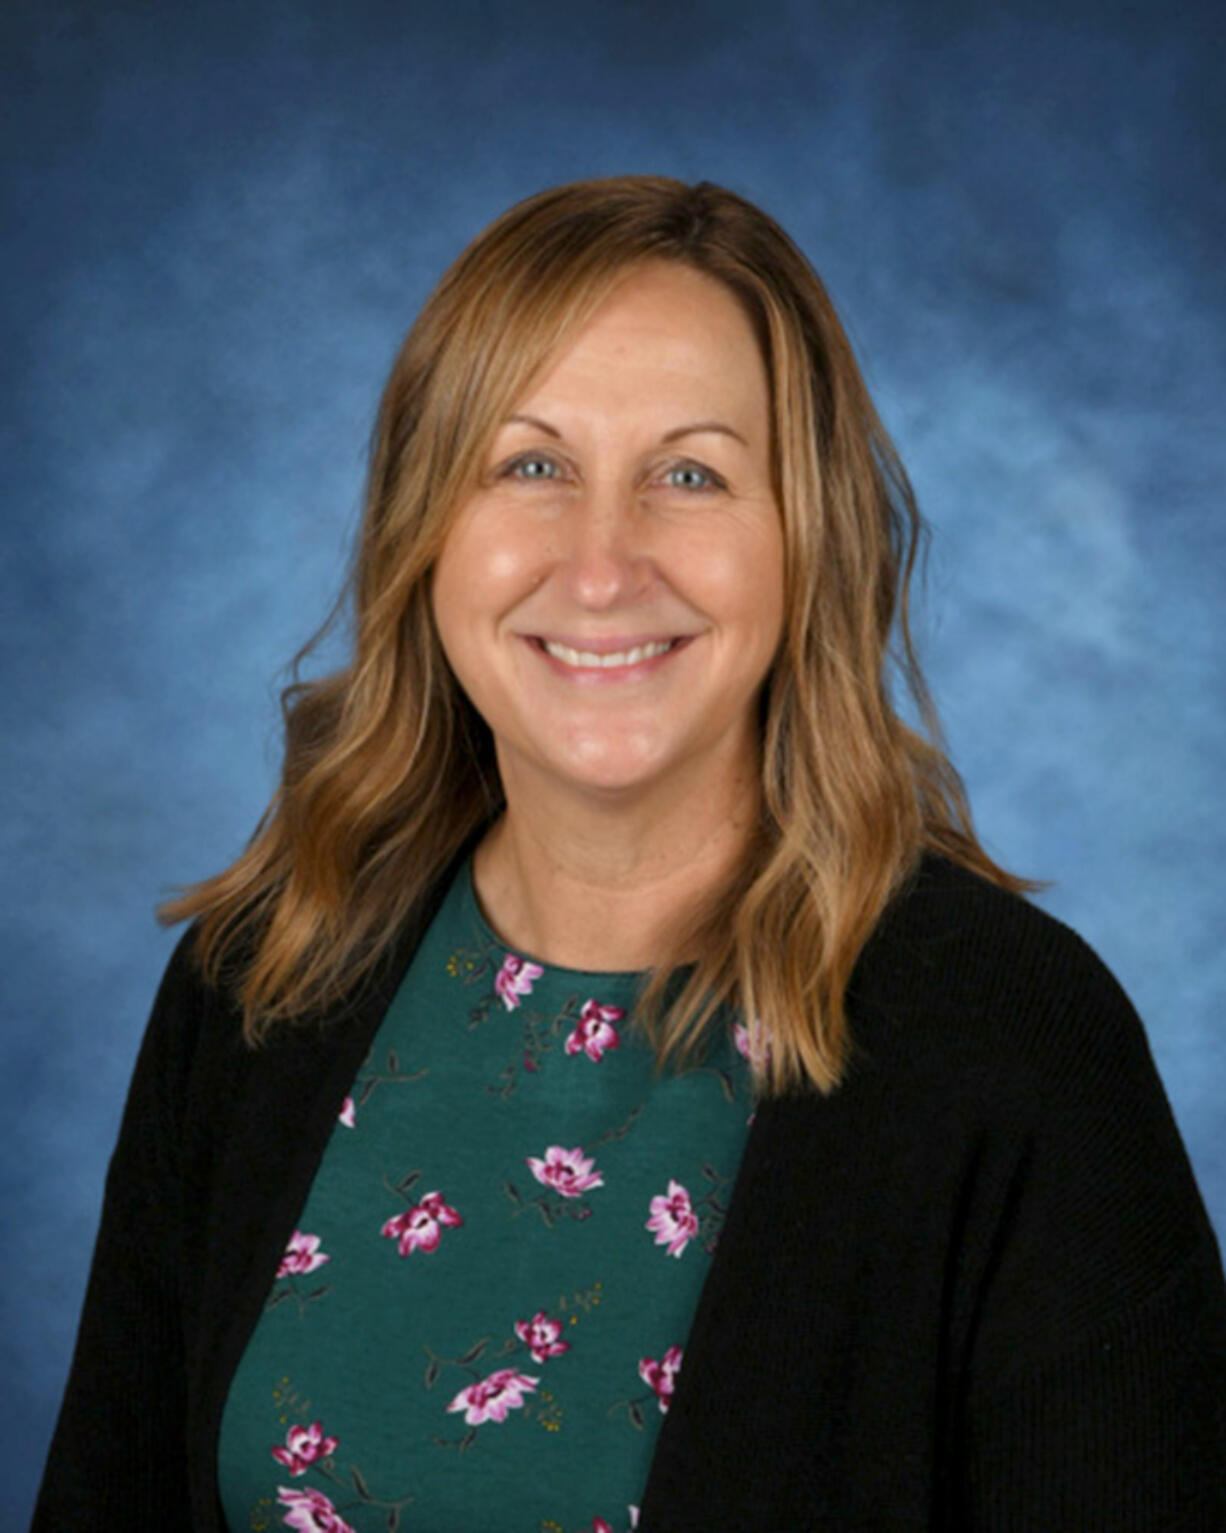 Ridgefield School District recently announced that Corrina Hollister has been awarded April's Employee of the Month.